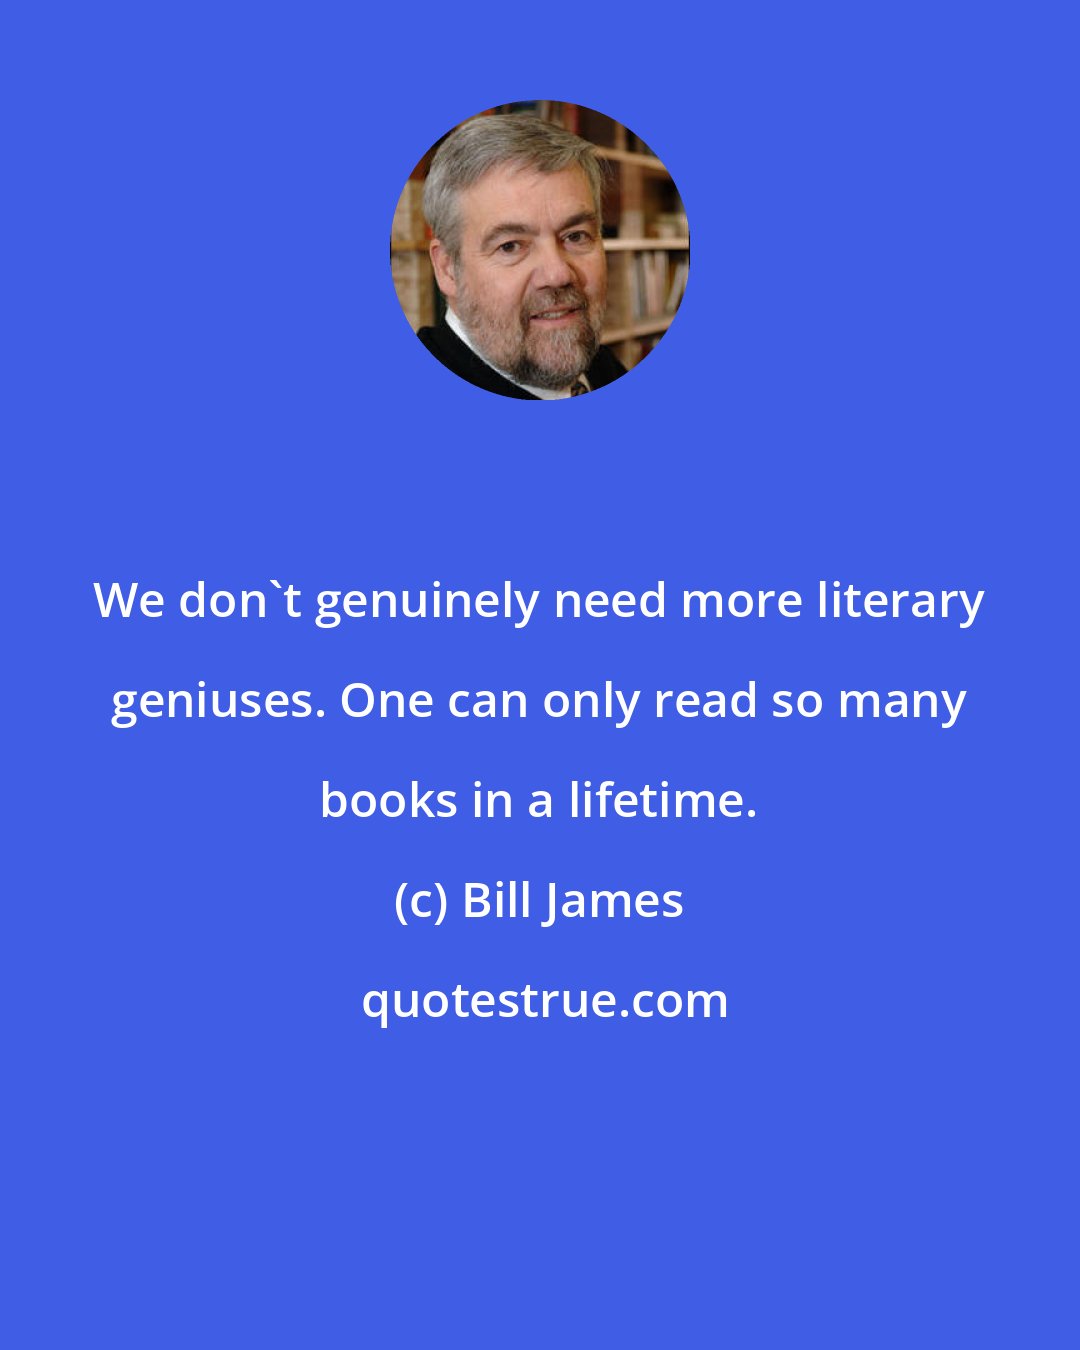 Bill James: We don't genuinely need more literary geniuses. One can only read so many books in a lifetime.